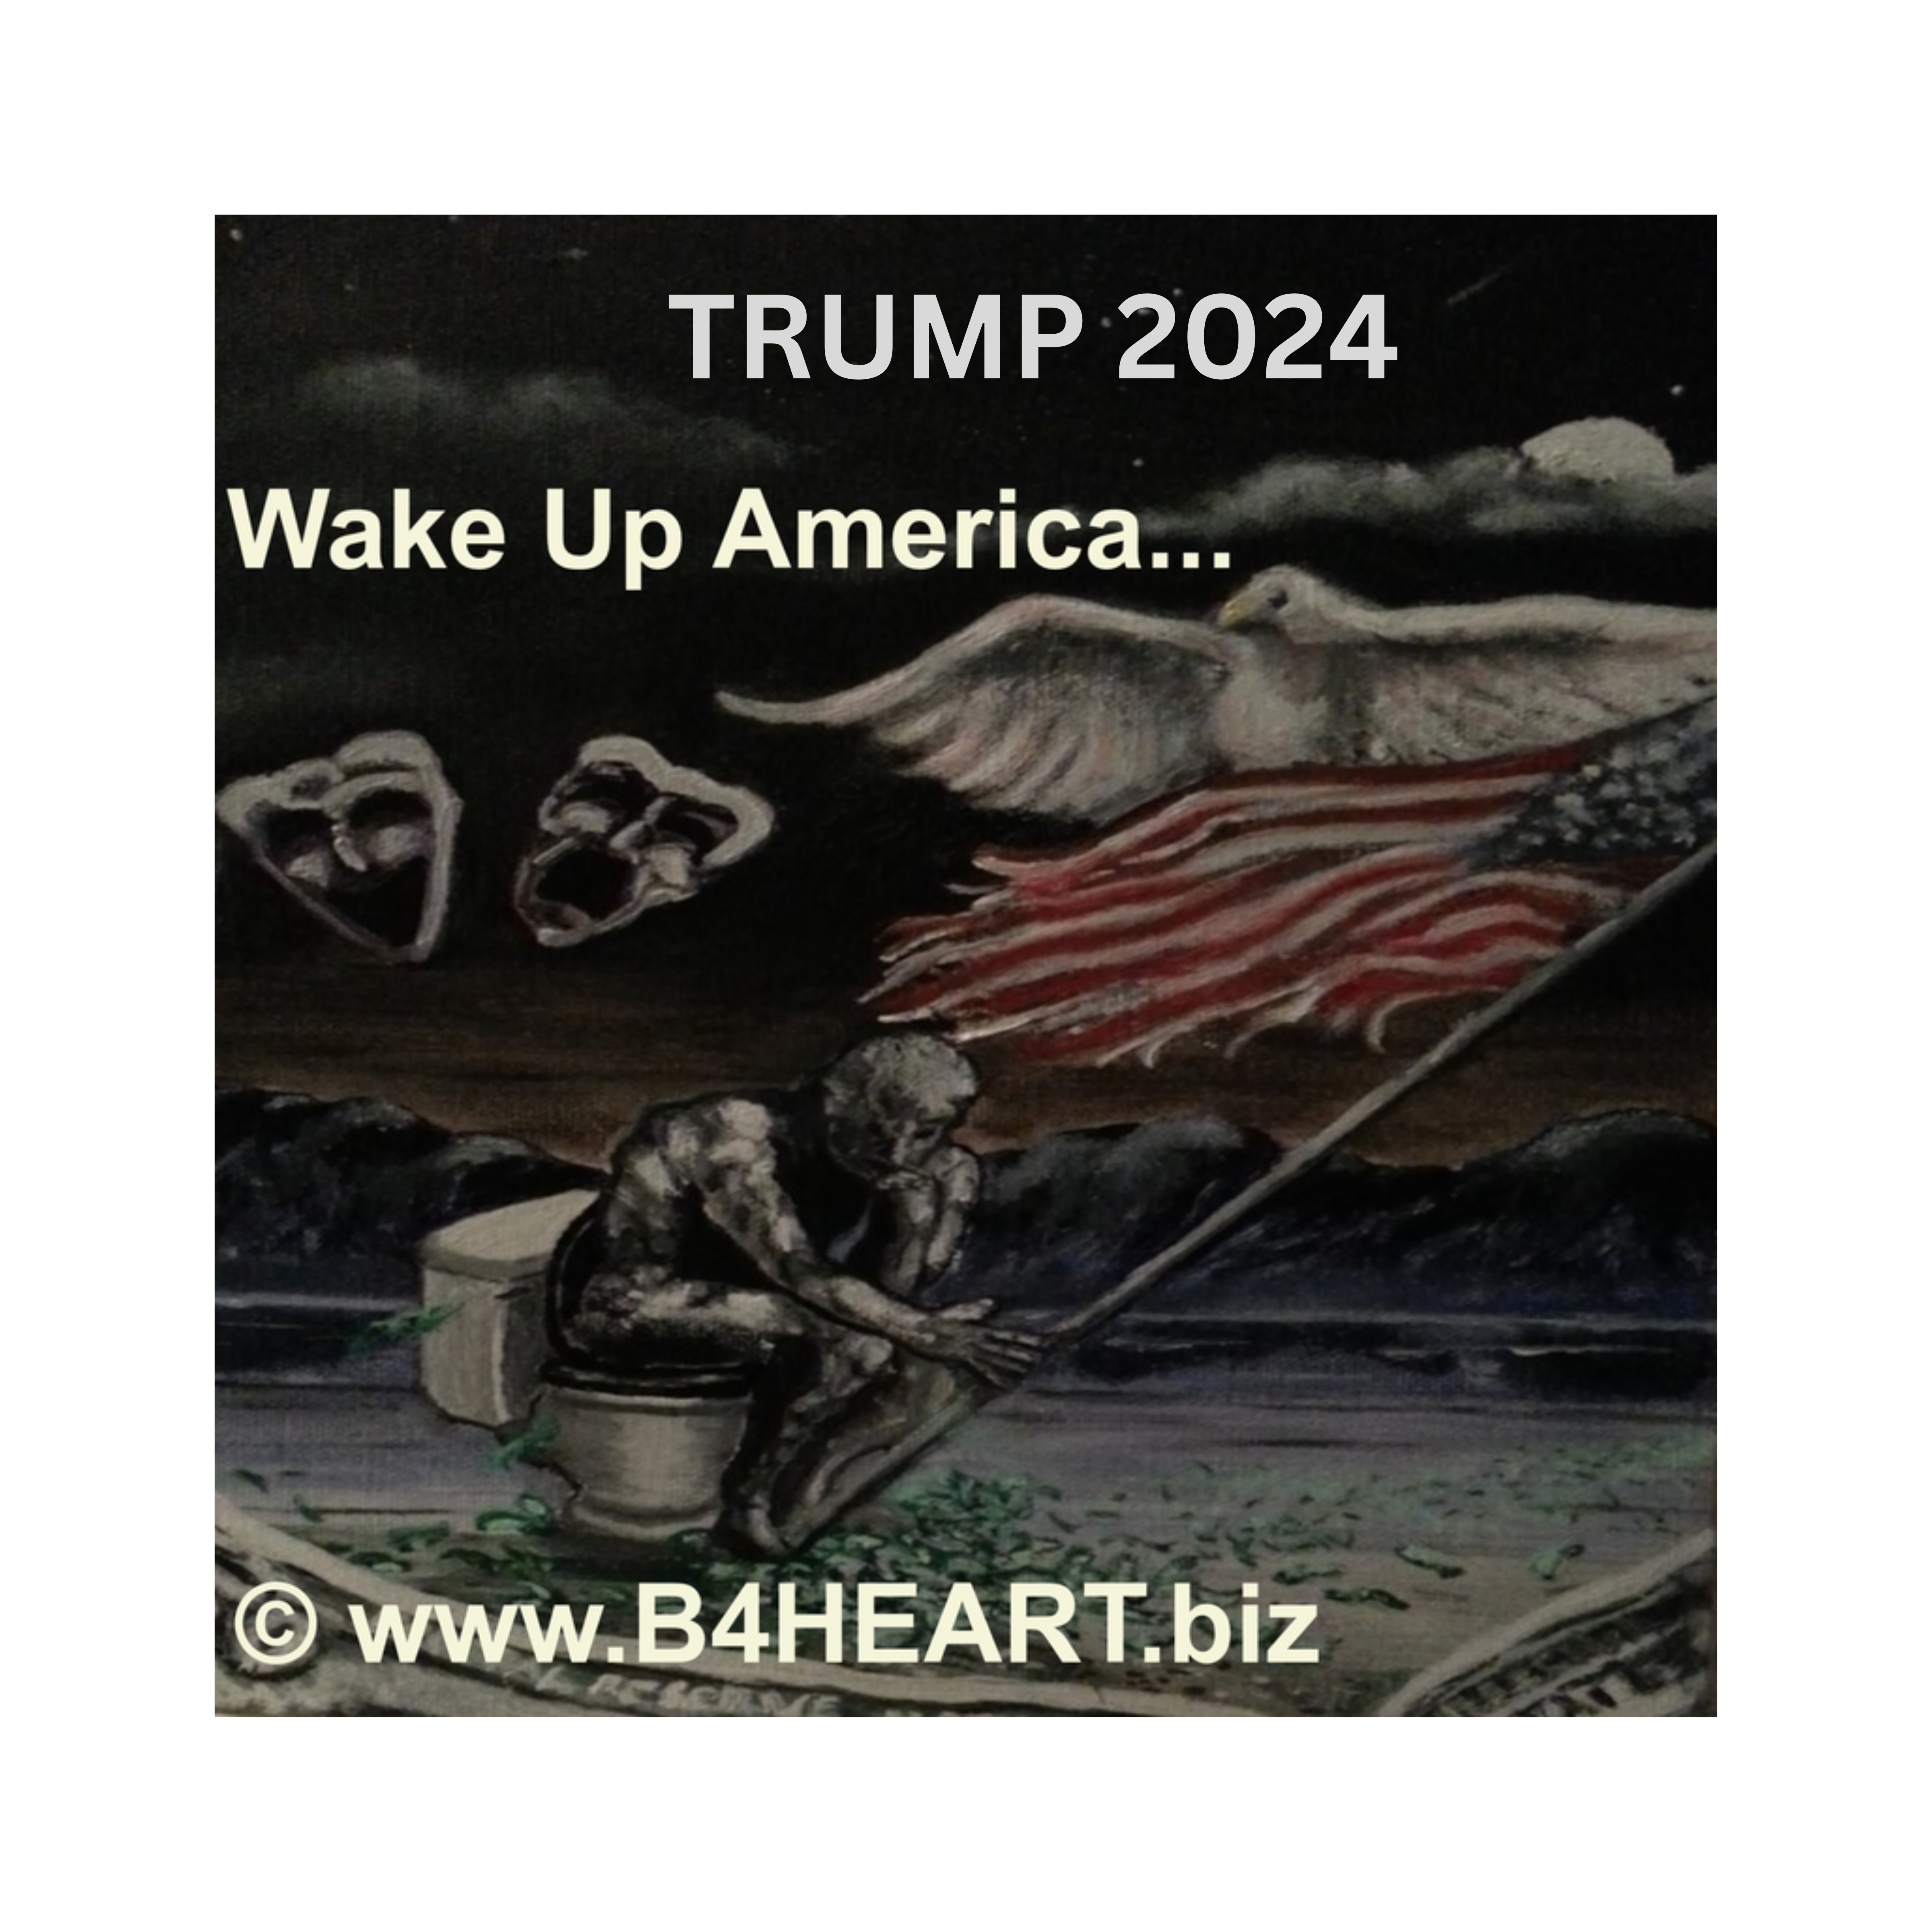 ltrump-2024-untitled-4800-4800-px-4800-4800-px-.png